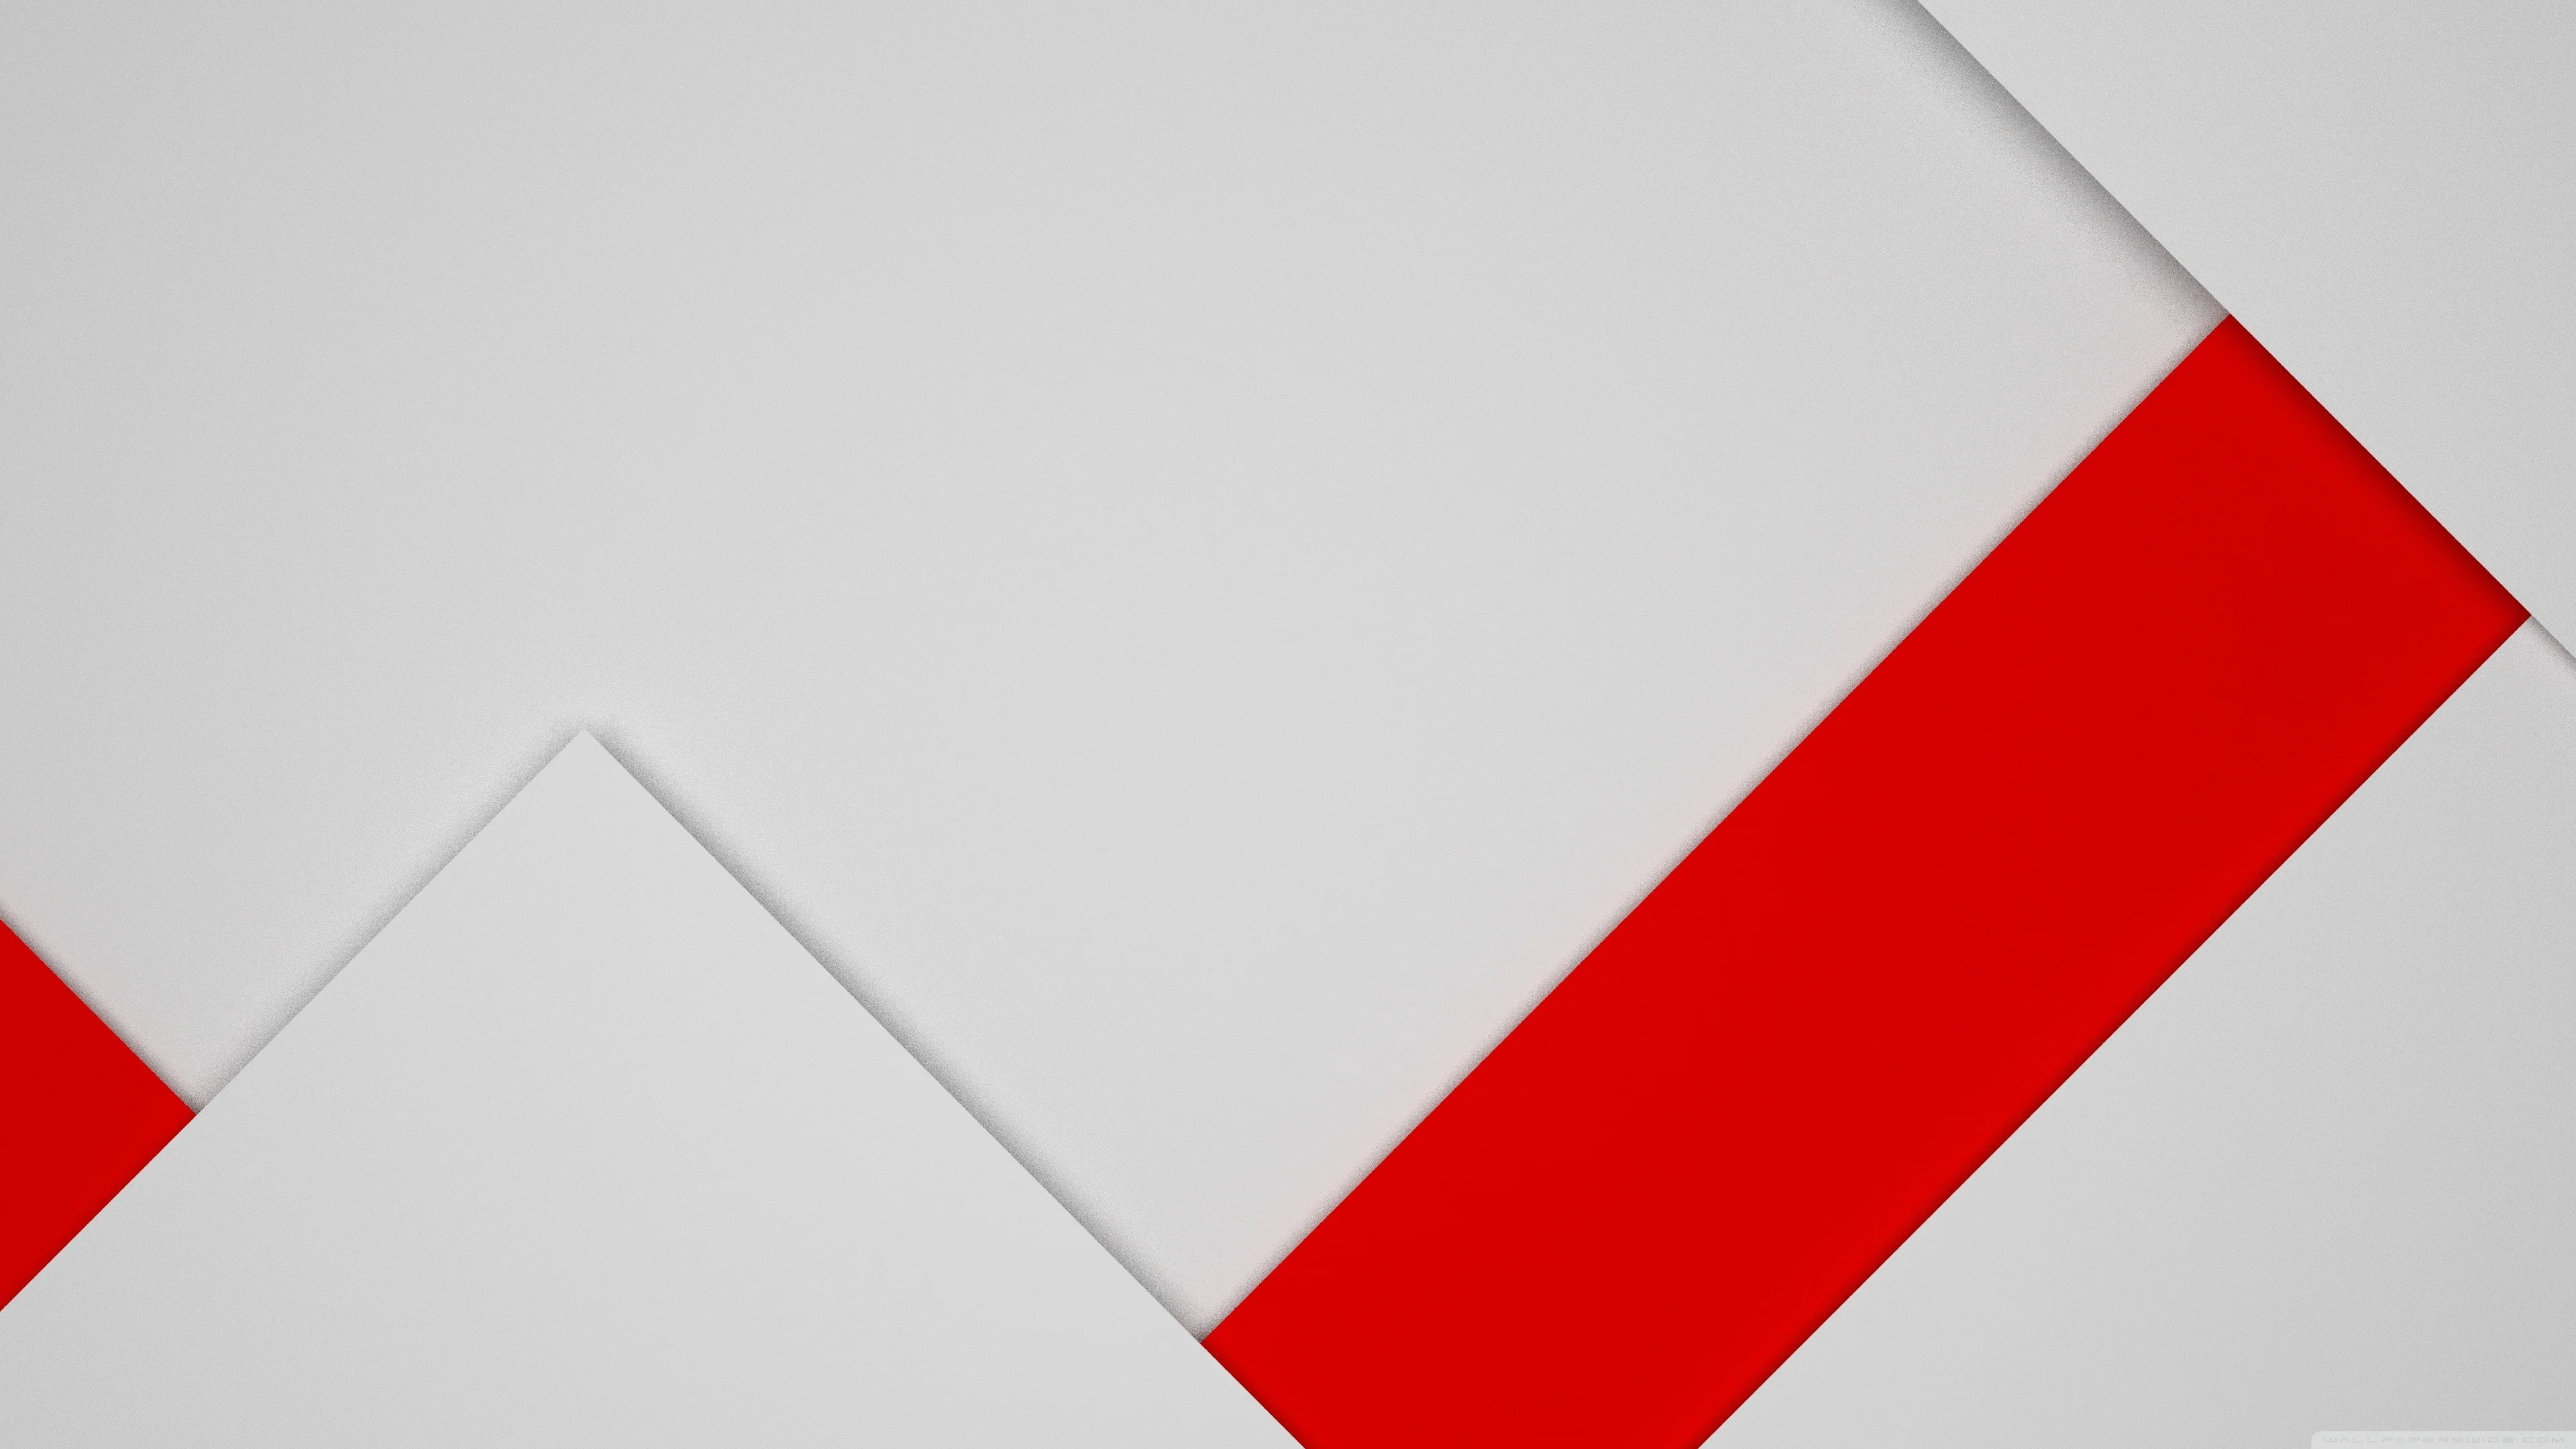 Raspaw: Background Red And White Wallpaper Hd